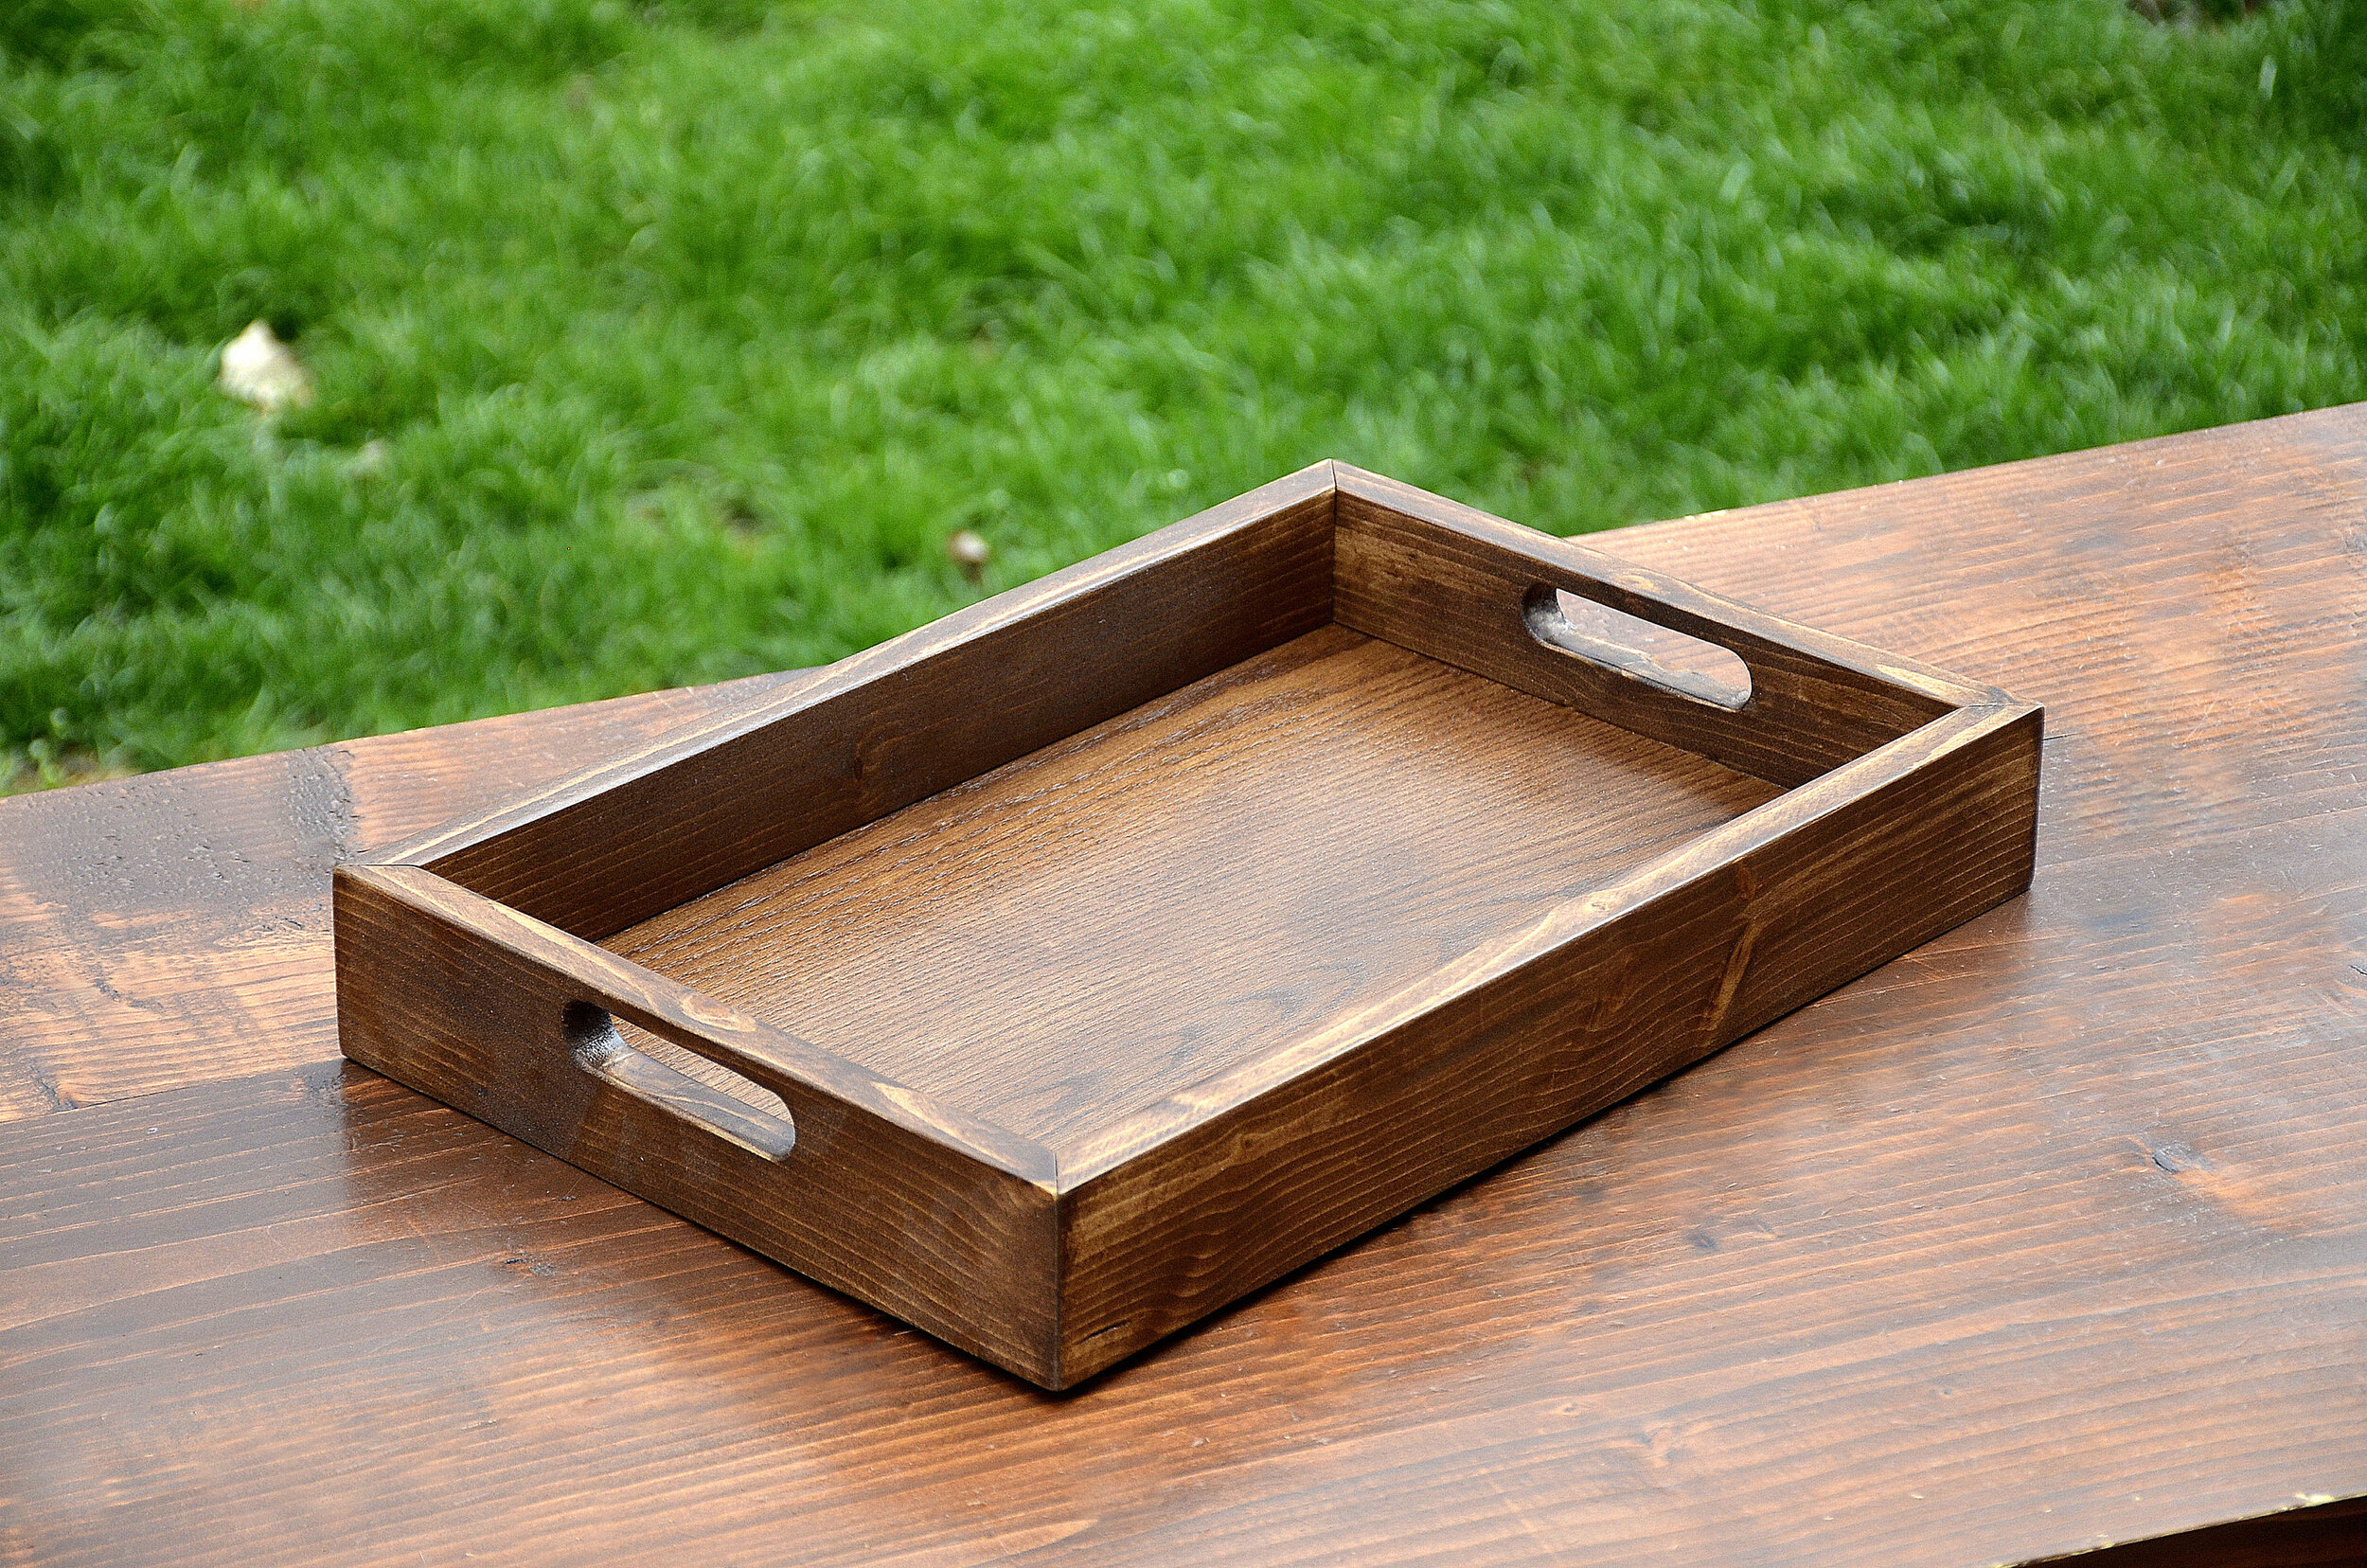 Natural Wood Ottoman Serving Tray 15.7x15.7 inch Wooden Tea Tray Decorative Tray